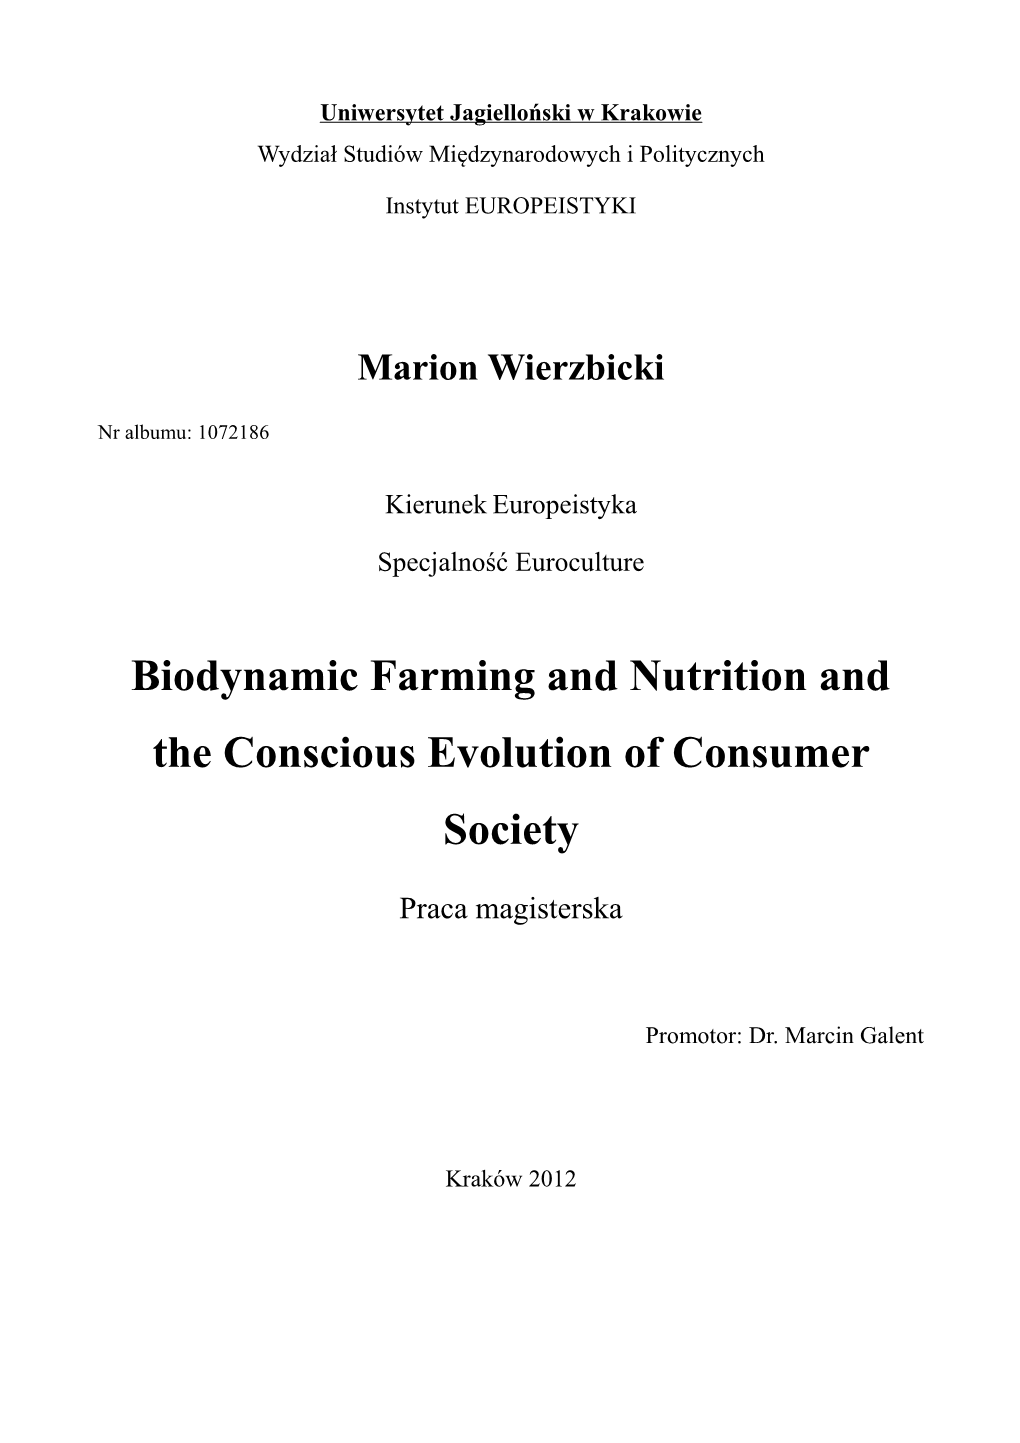 Biodynamic Farming and Nutrition and the Conscious Evolution of Consumer Society